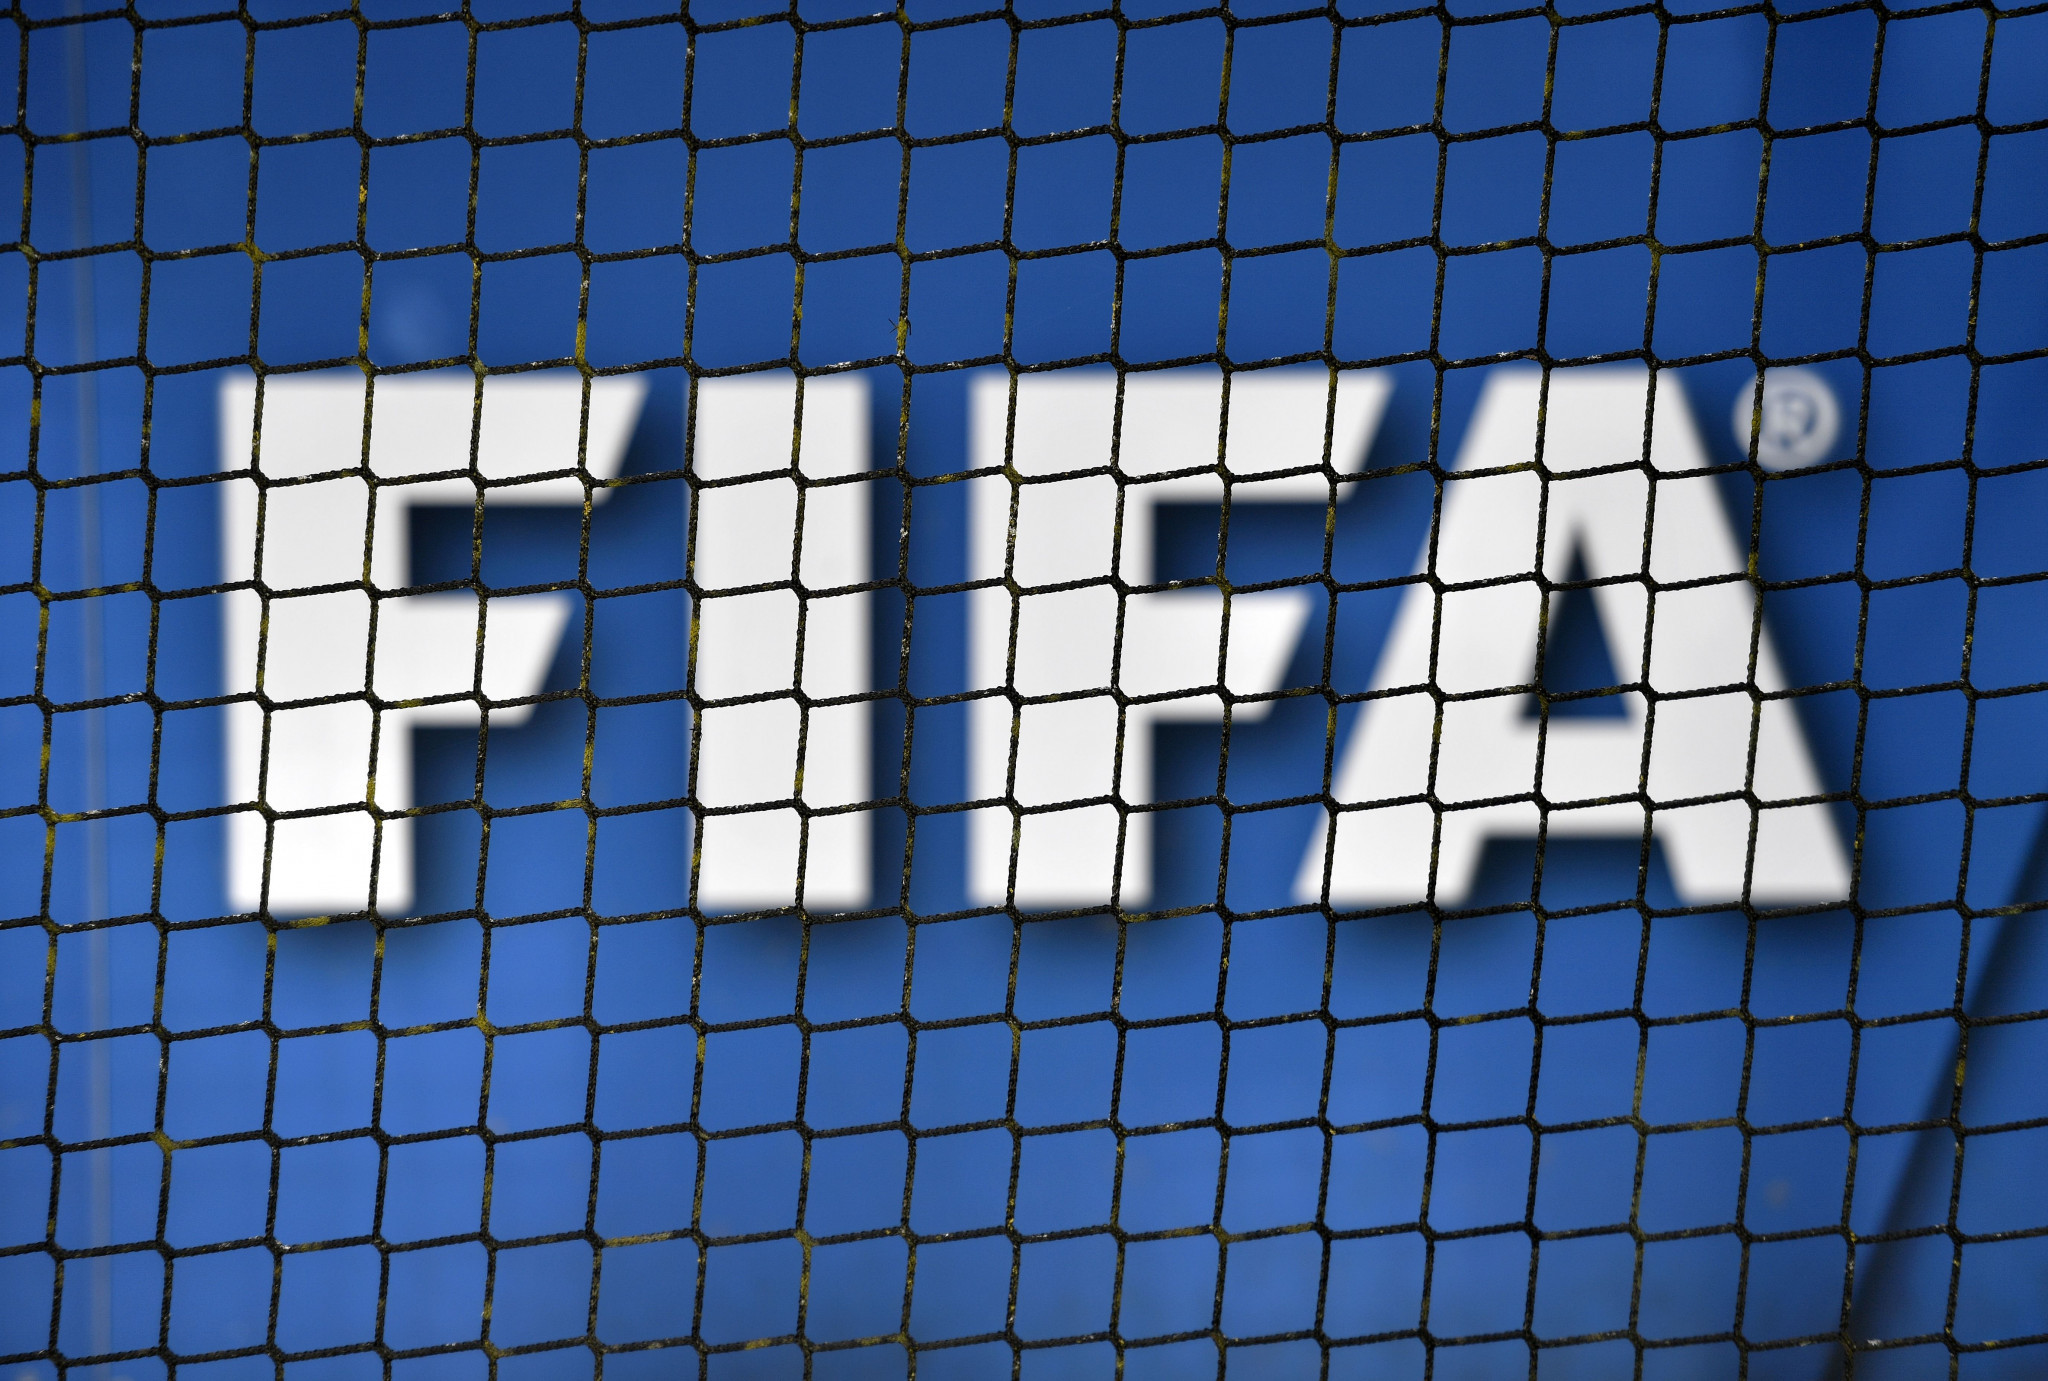 FIFA has confirmed its systems were hacked earlier this year ©Getty Images